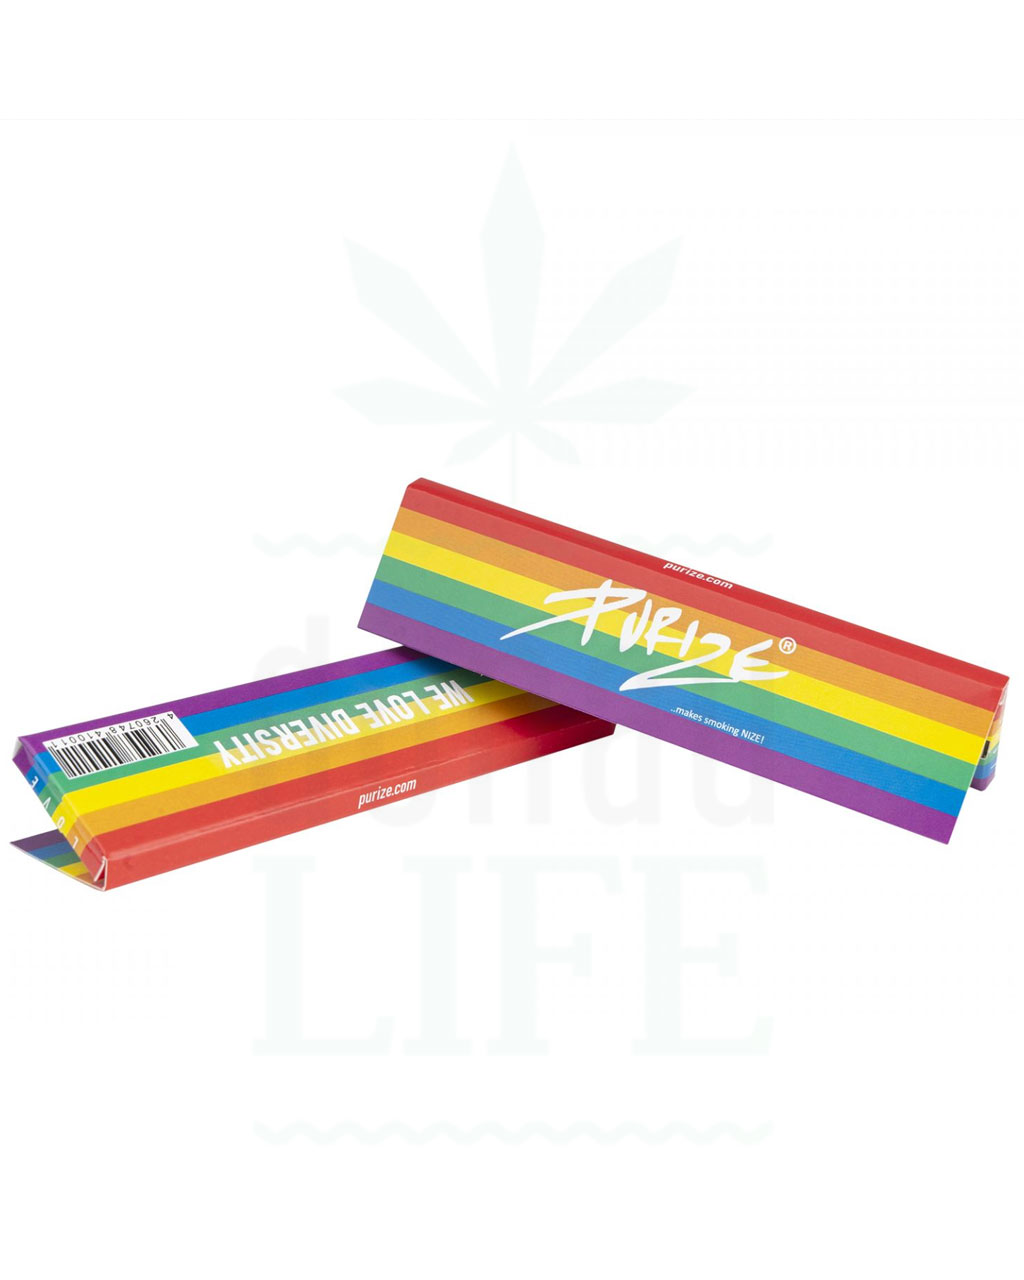 Longpapers / King Size PURIZE KSS Papers ‚Rainbow Edition‘ | 32 Blatt